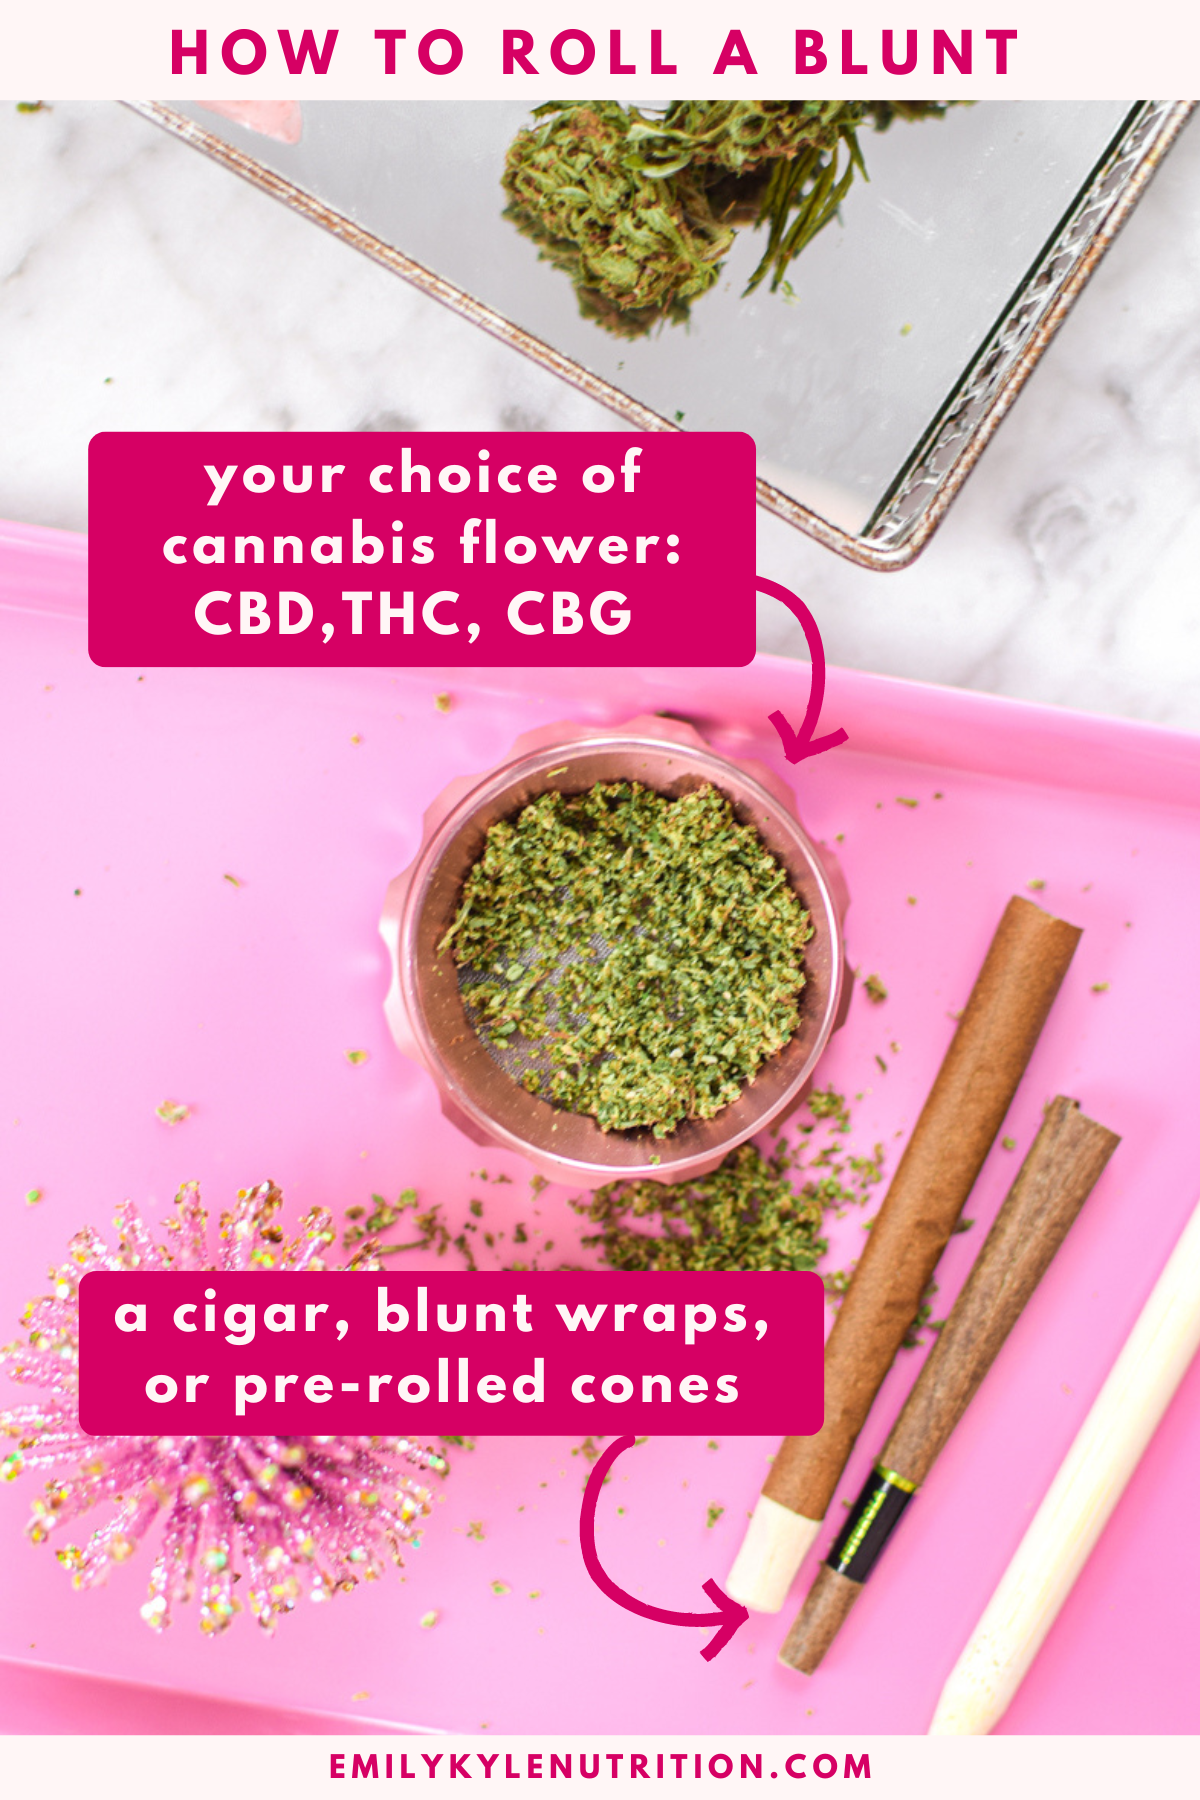 A picture of a pink cannabis grinder on a pink tray with text stating cannabis flower or wraps. 